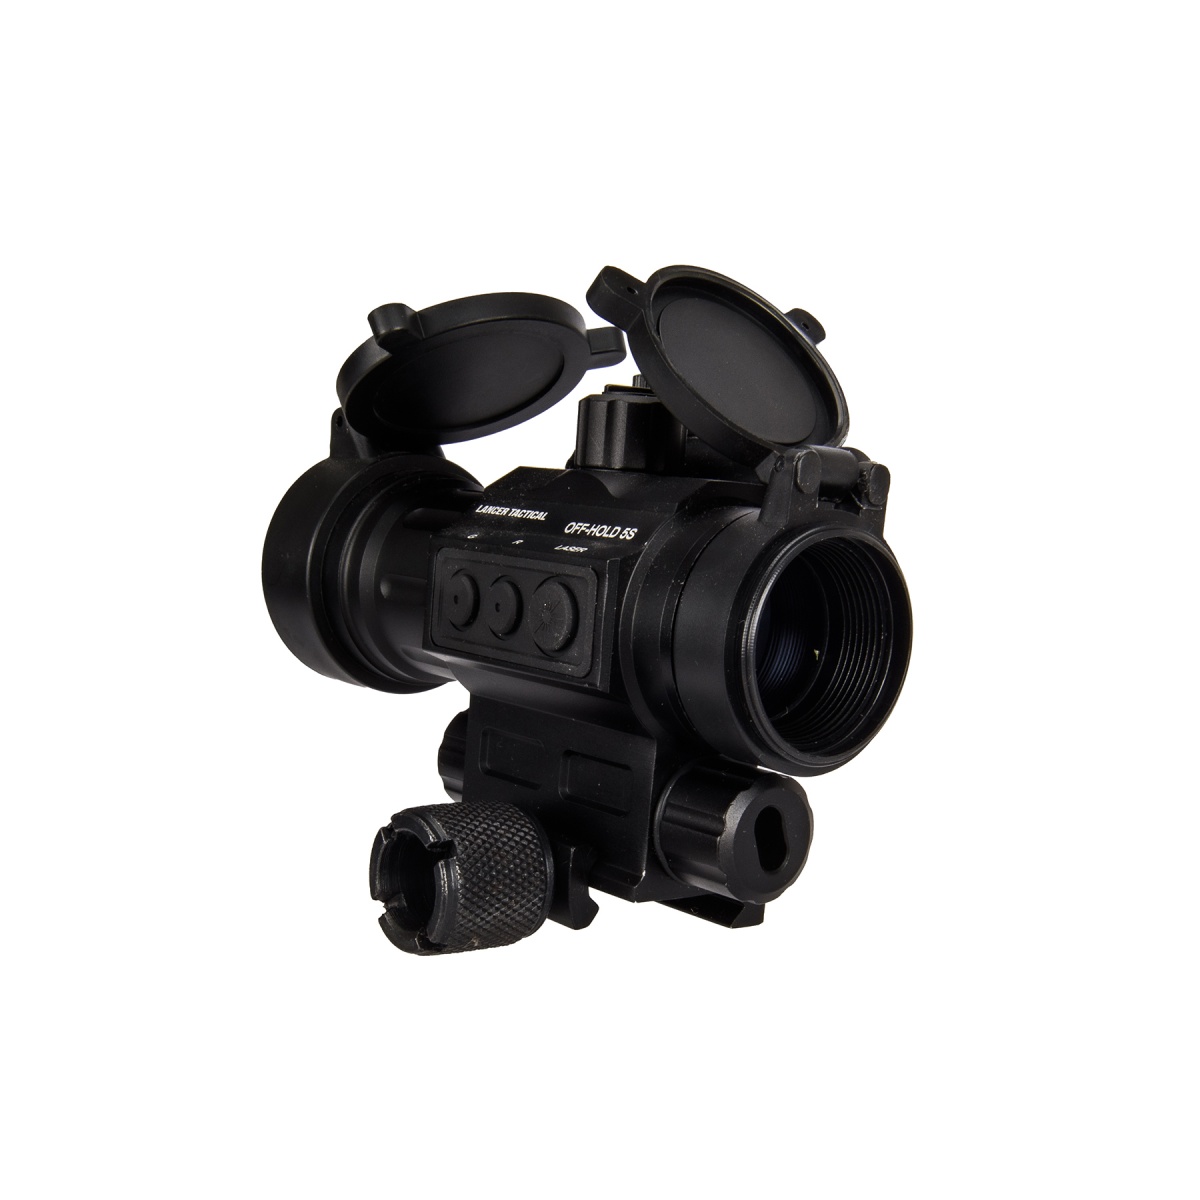 Lancer Tactical Dual Red & Green Illuminated Scope W Red Laser 17770 for sale online 